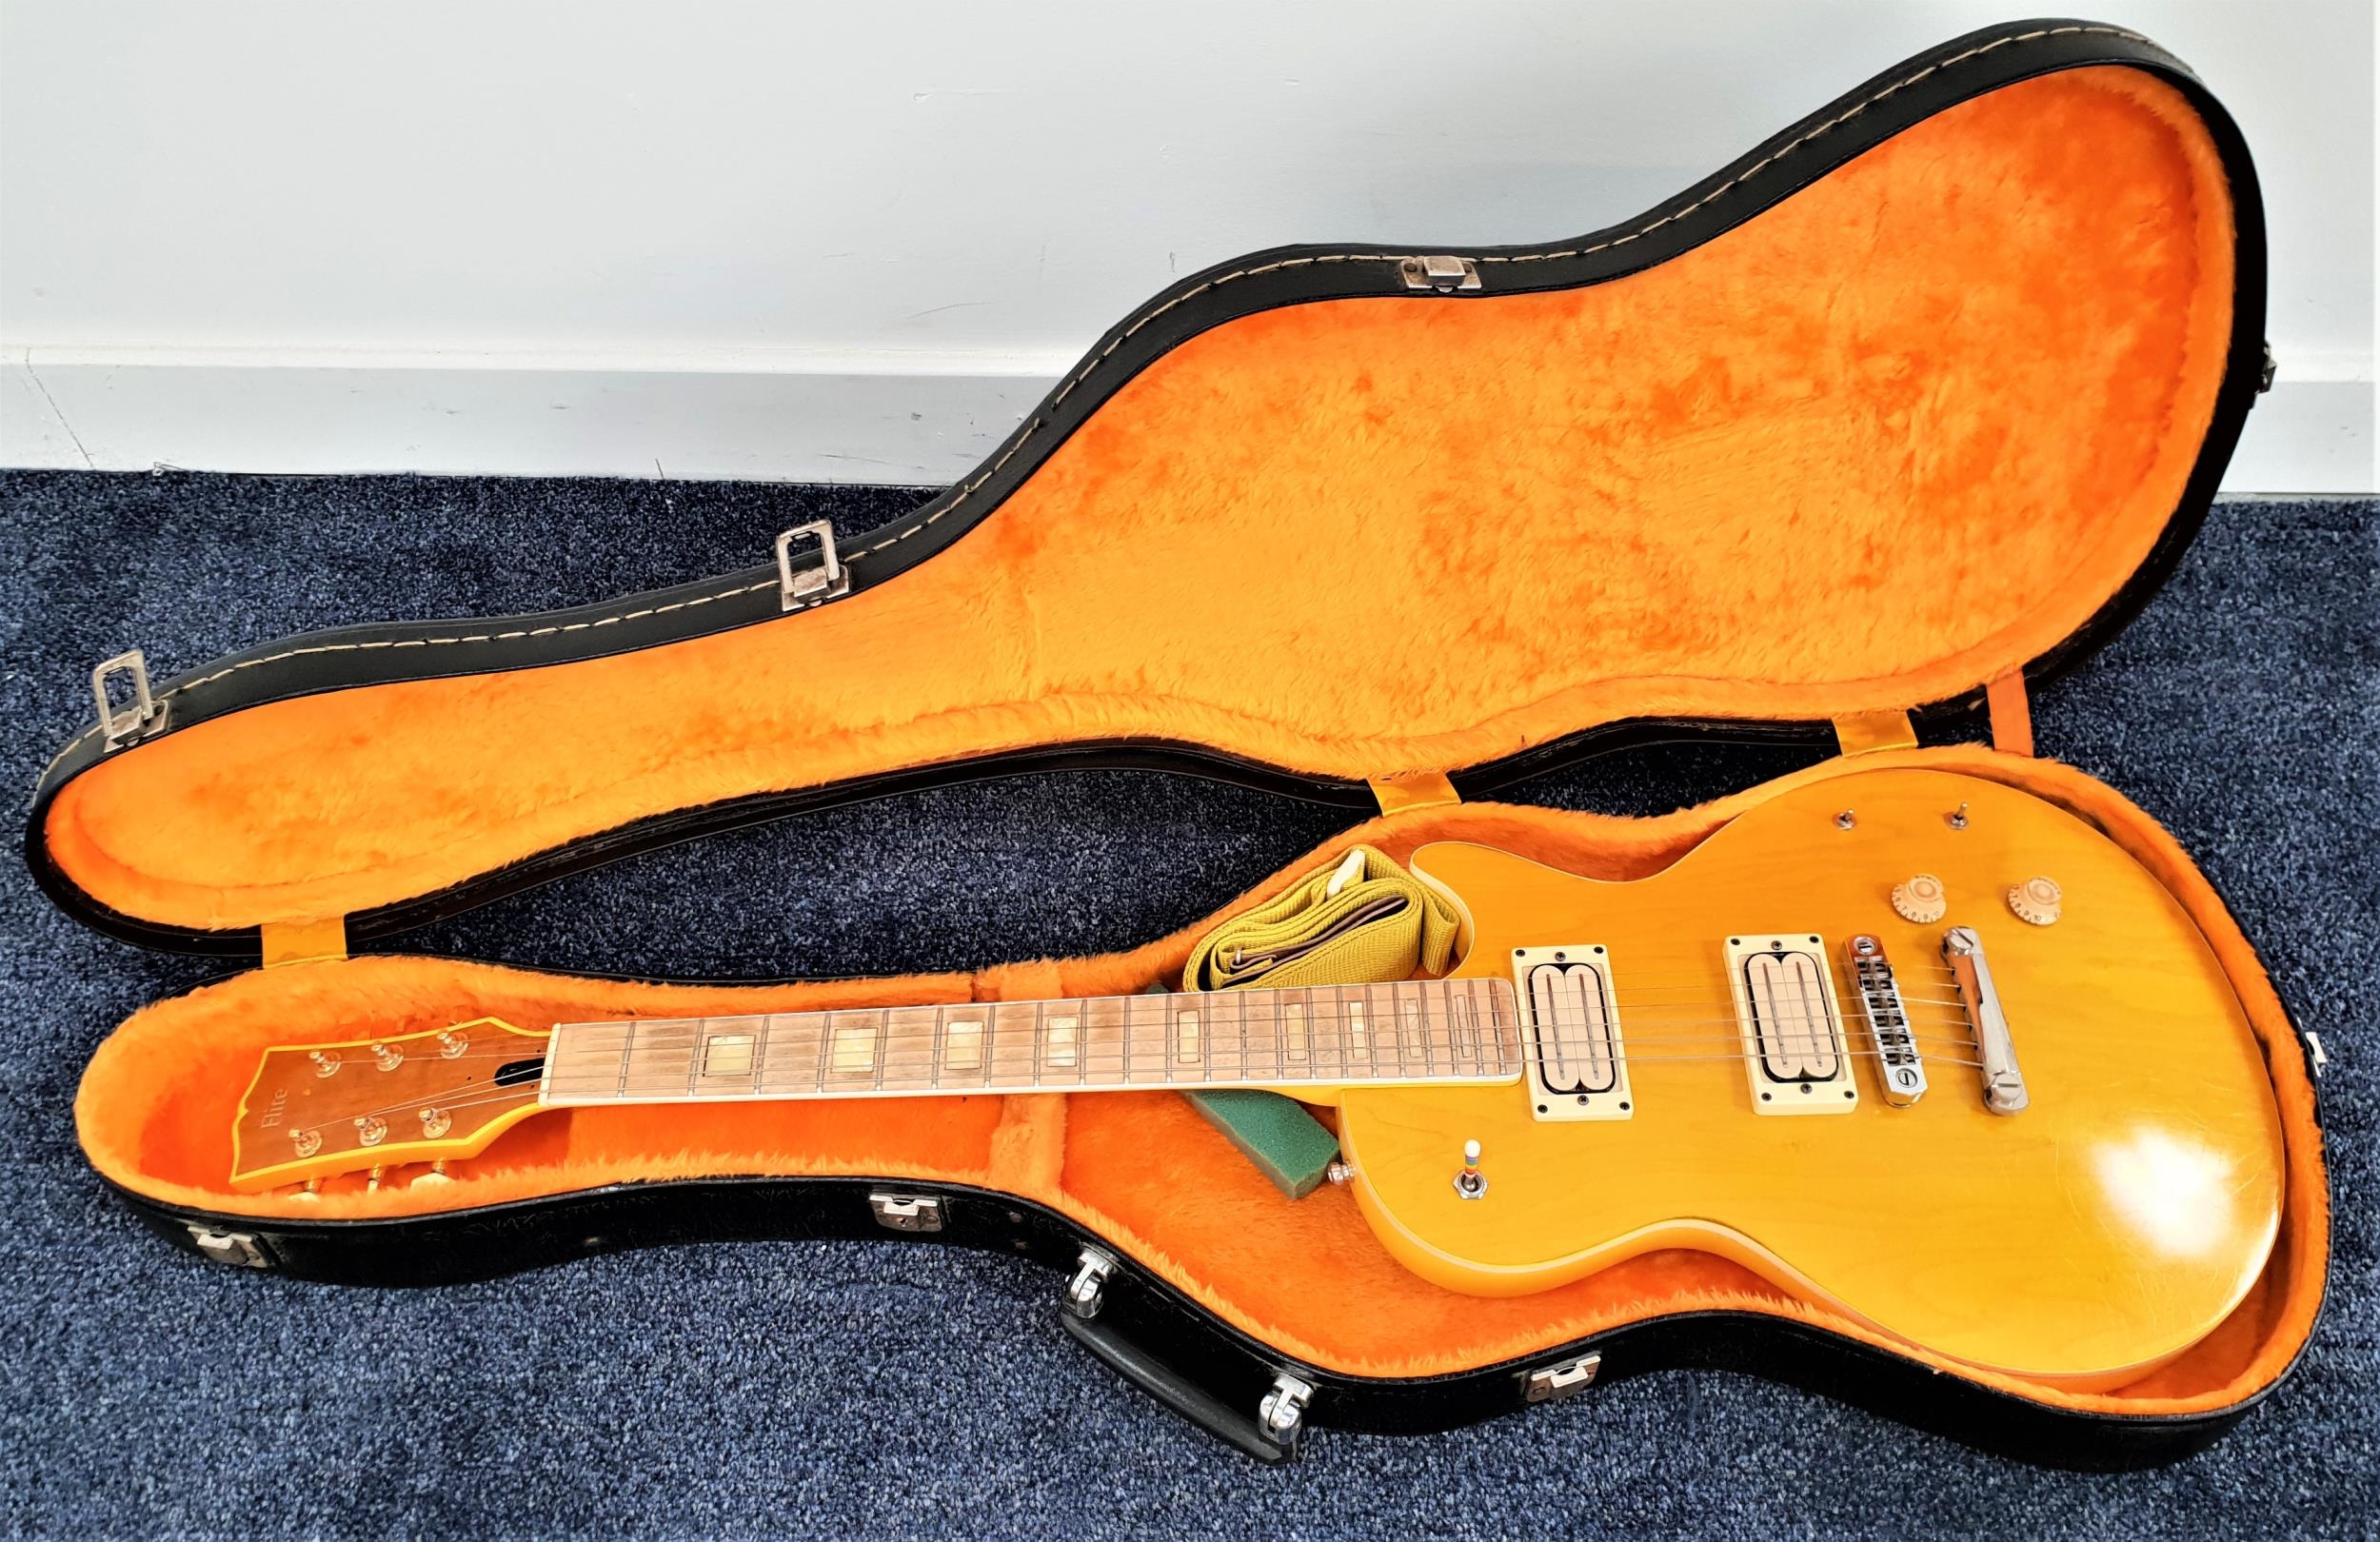 FLITE HAND BUILT ELECTRIC GUITAR with a stained ash yellow body, with two dials and two switches, in